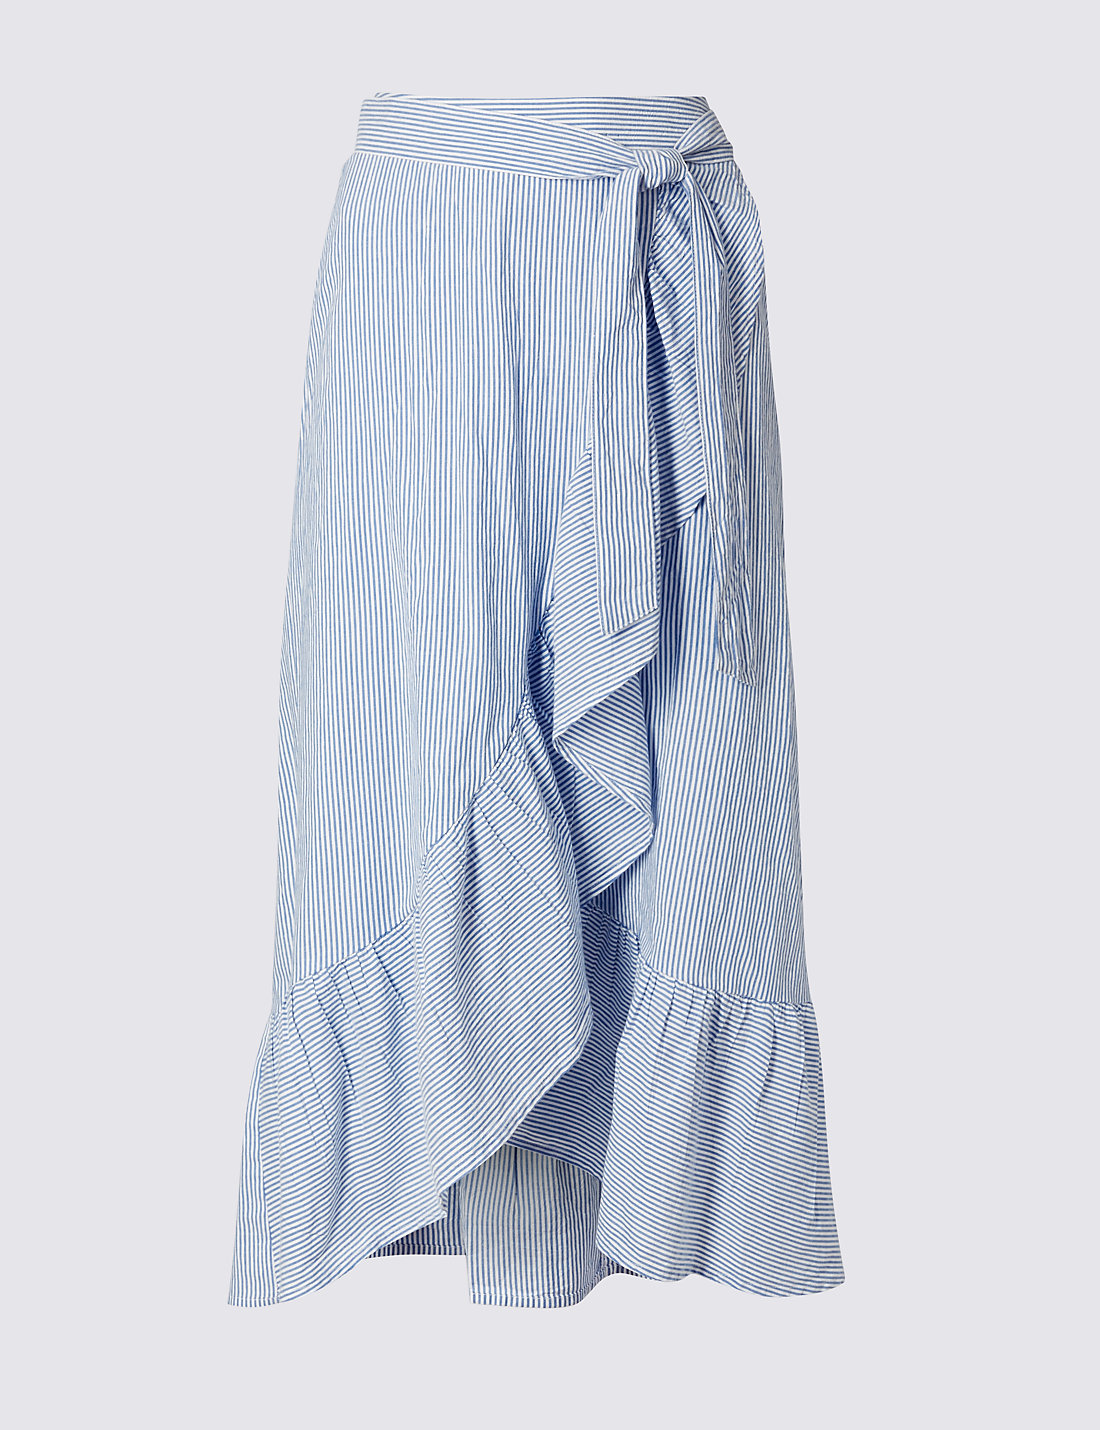 Another New Purchase + WIWT - All Blue With Silk & Denim | My Midlife ...